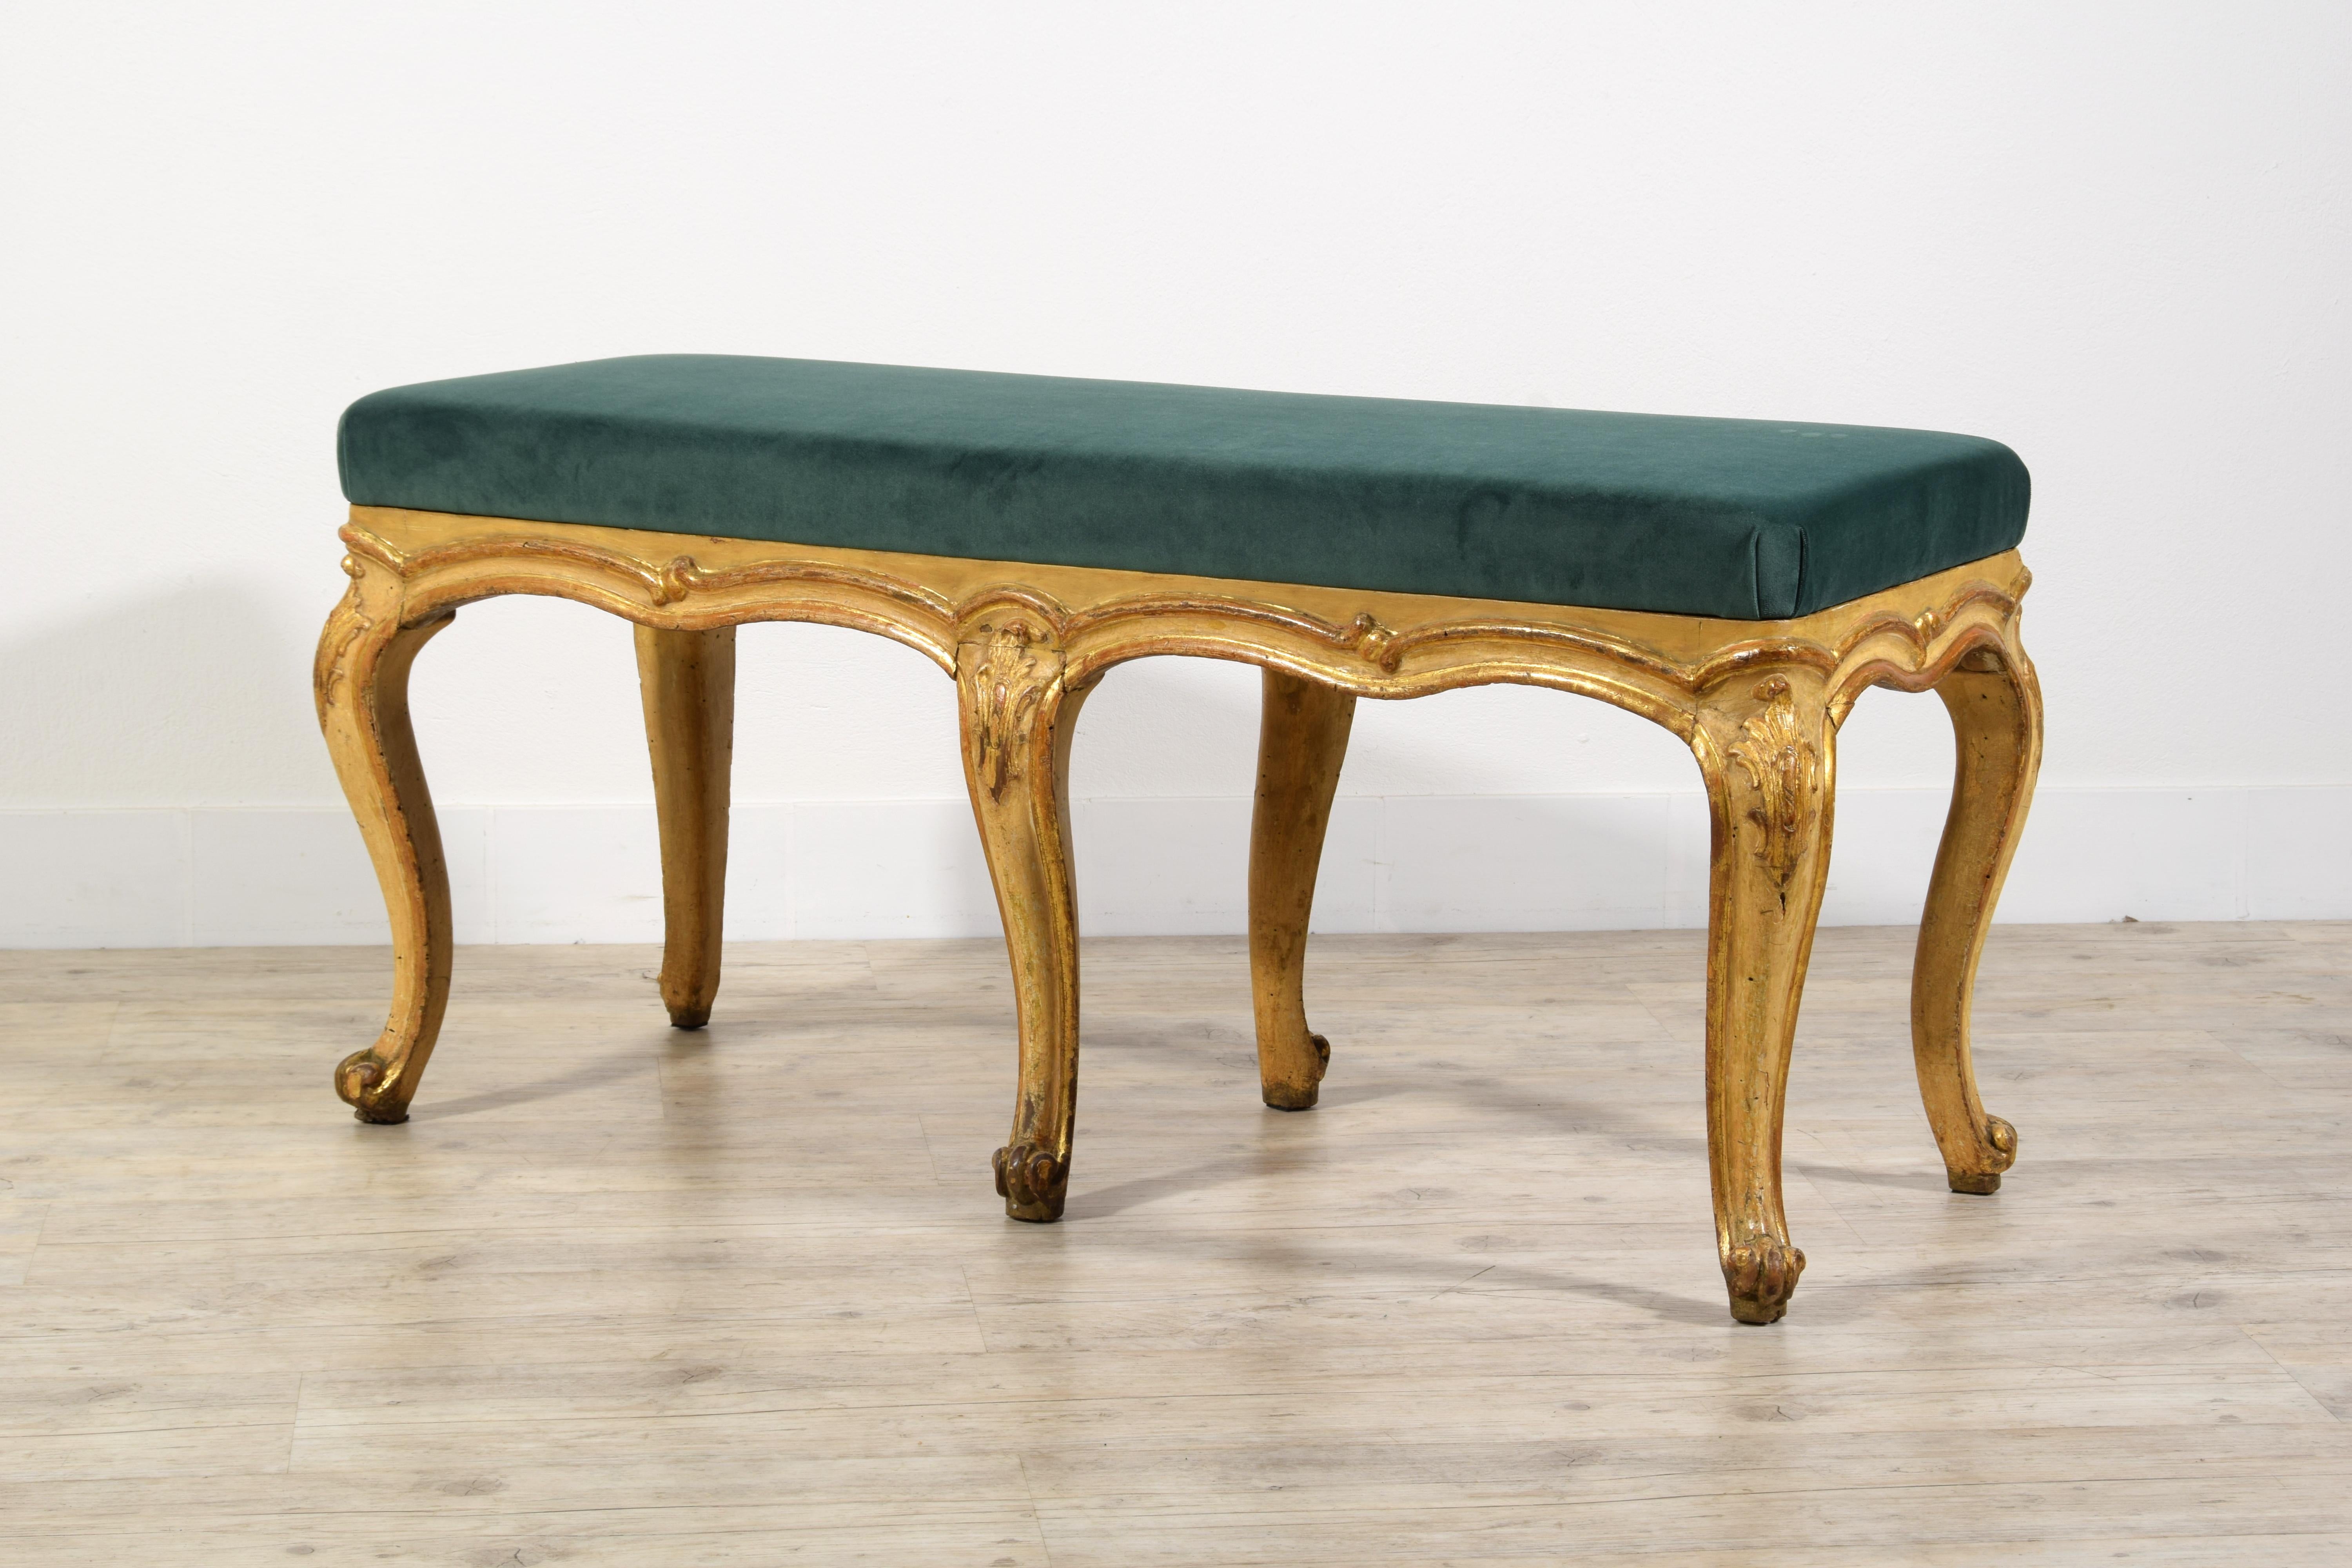 18th century, Italian Lacquered and Gilt Wood Bench 
This elegant bench in lacquered and gilded wood, was made in the Rococo period in Genoa, Italy, around the middle of the eighteenth century.
The under-top band is carved with a profile with a